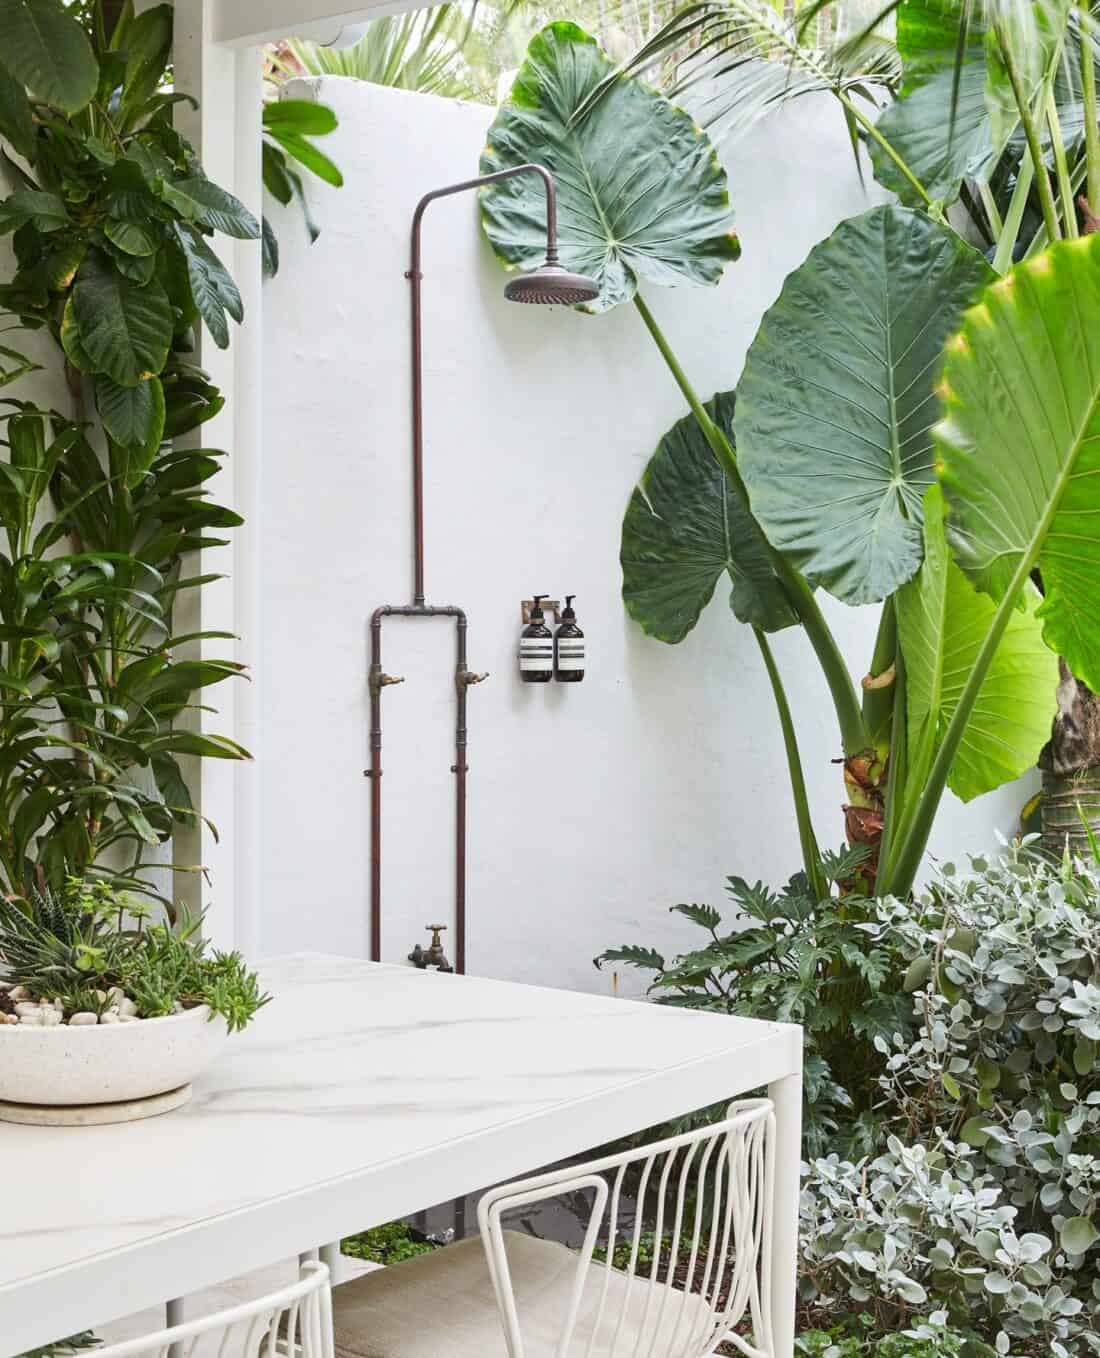 An outdoor shower surrounded by lush tropical plants, providing cool-off relief. This shower features a vintage-style overhead head and dark metal piping, alongside a white table and chair.